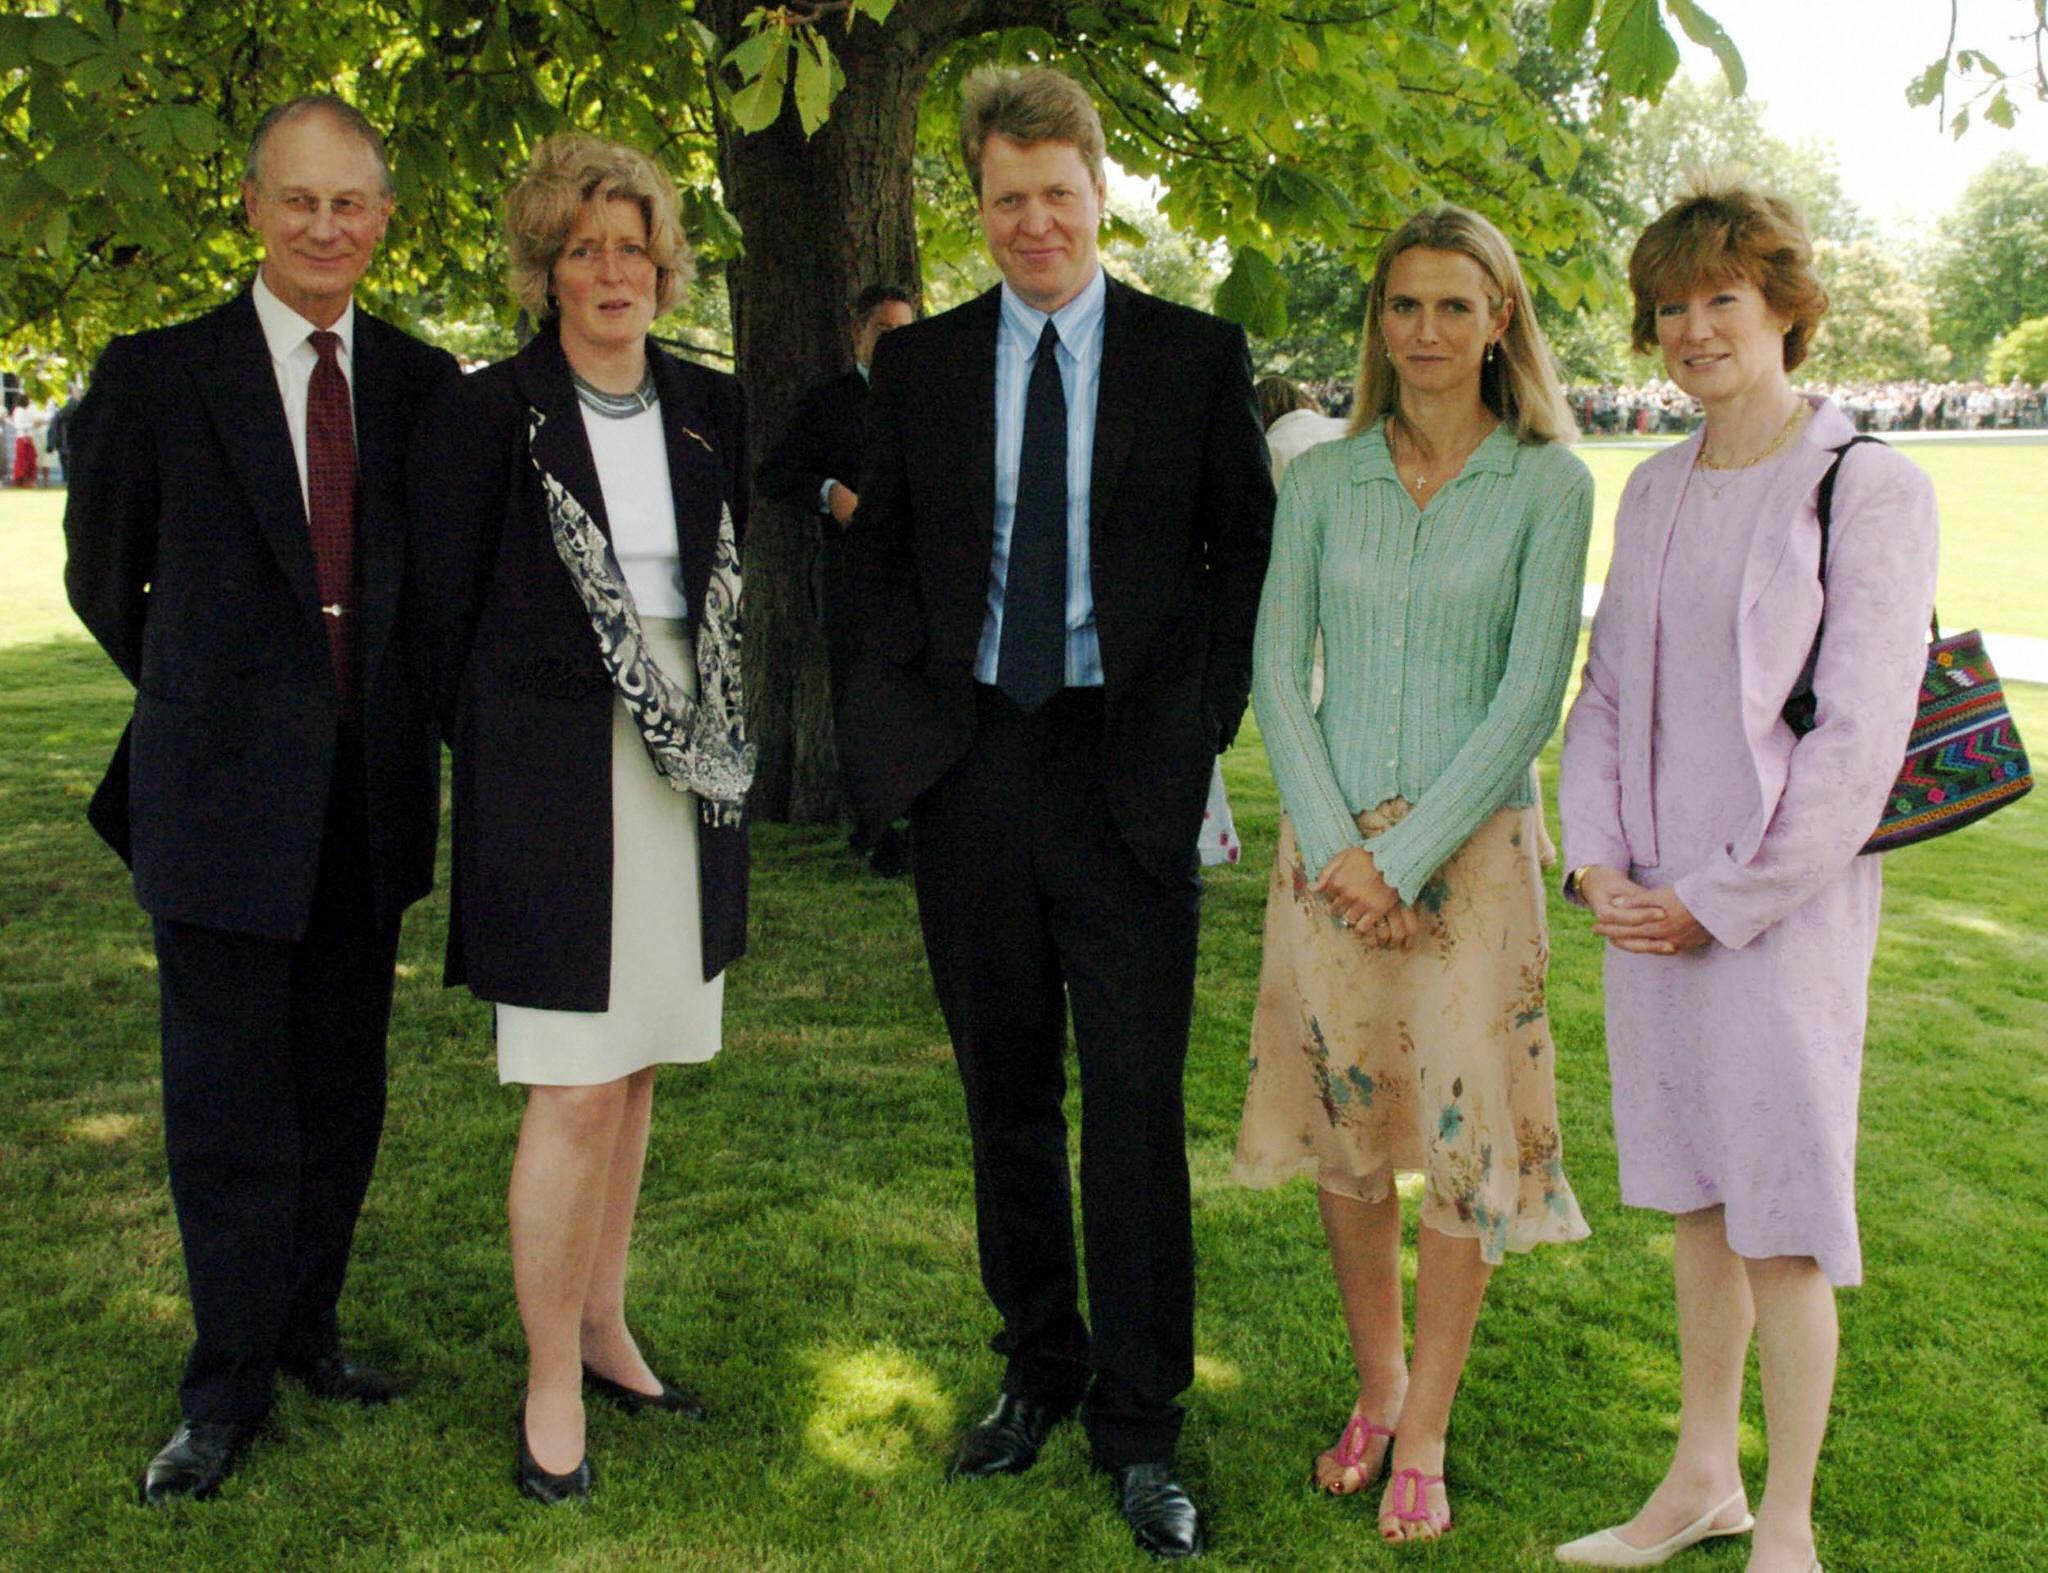 Earl Spencer (C) with (L-R) Sir William Fellowes, Lady Jane Fellowes, Lady Spencer and Lady Sarah Macorquadale at Diana memorial